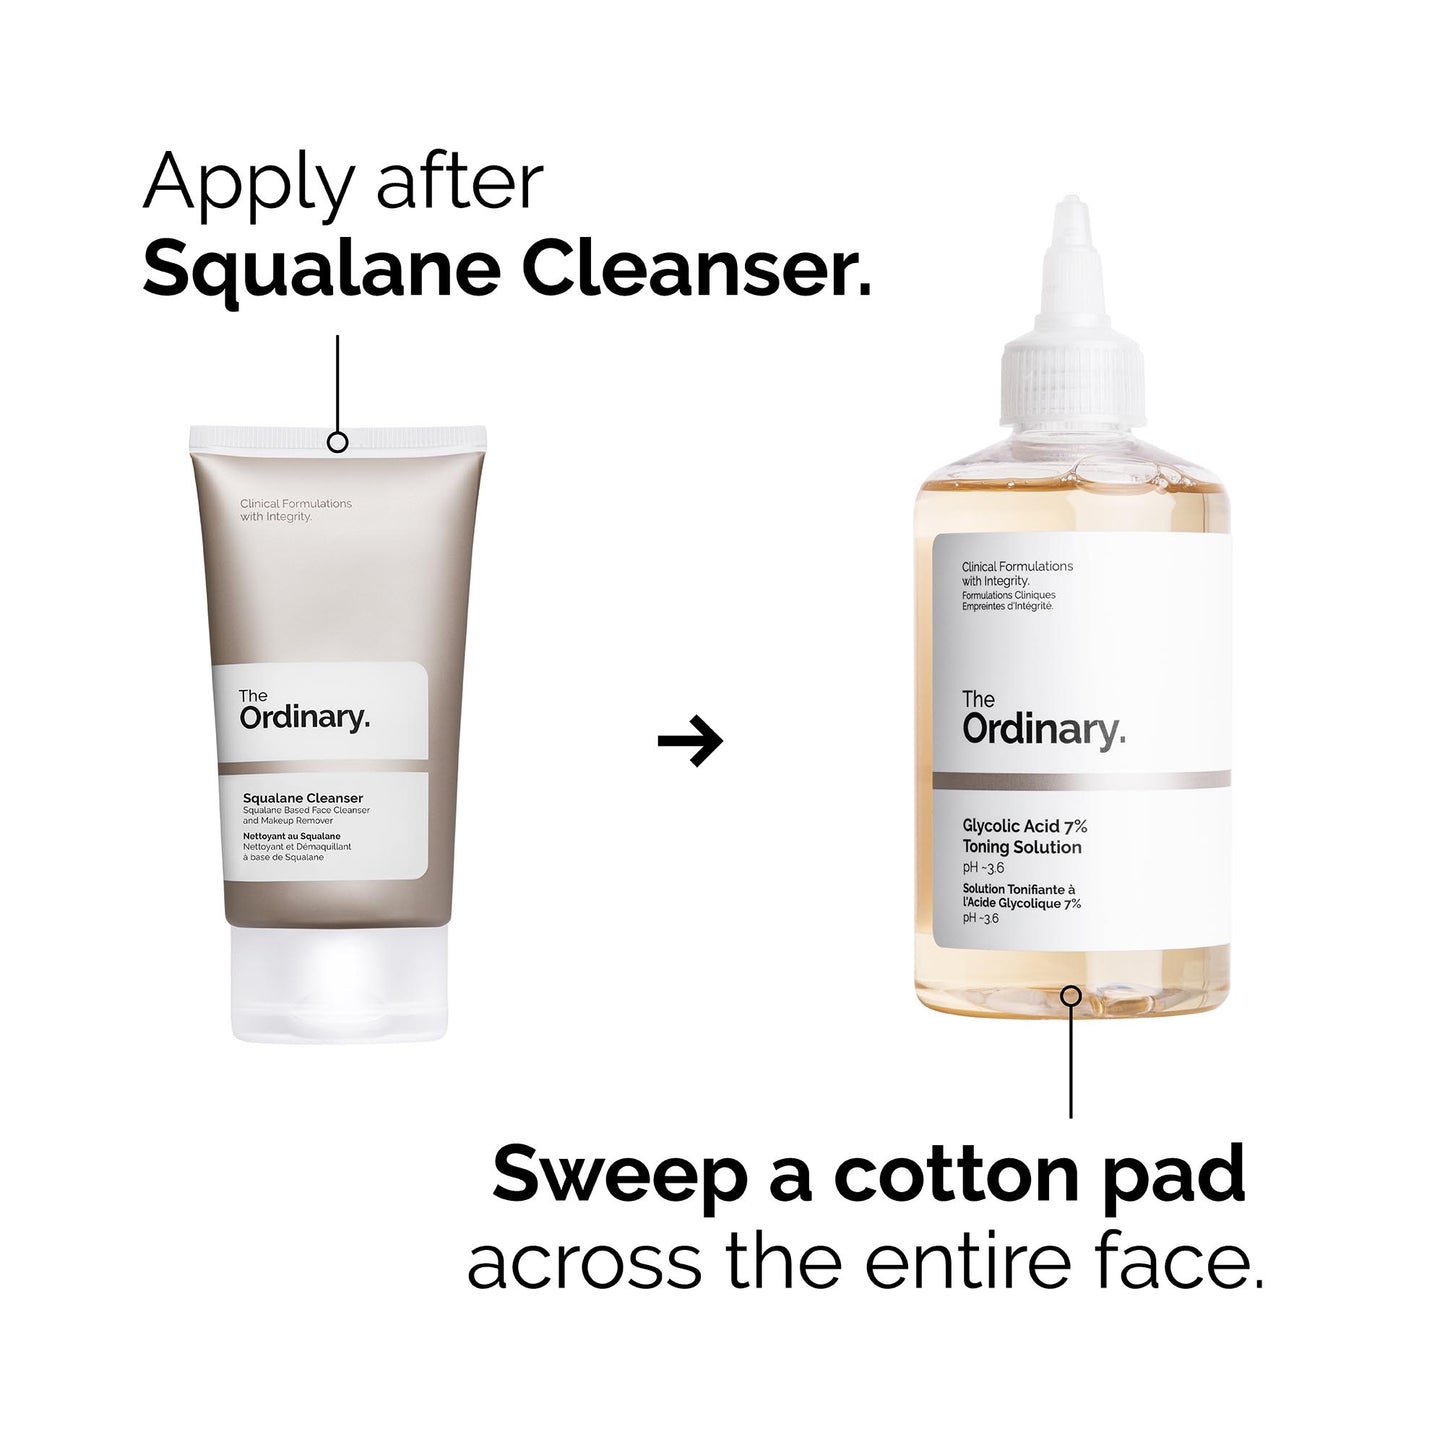 THE ORDINARY – Glycolic Acid 7% Solution Tonifiante – Sultana Luxe